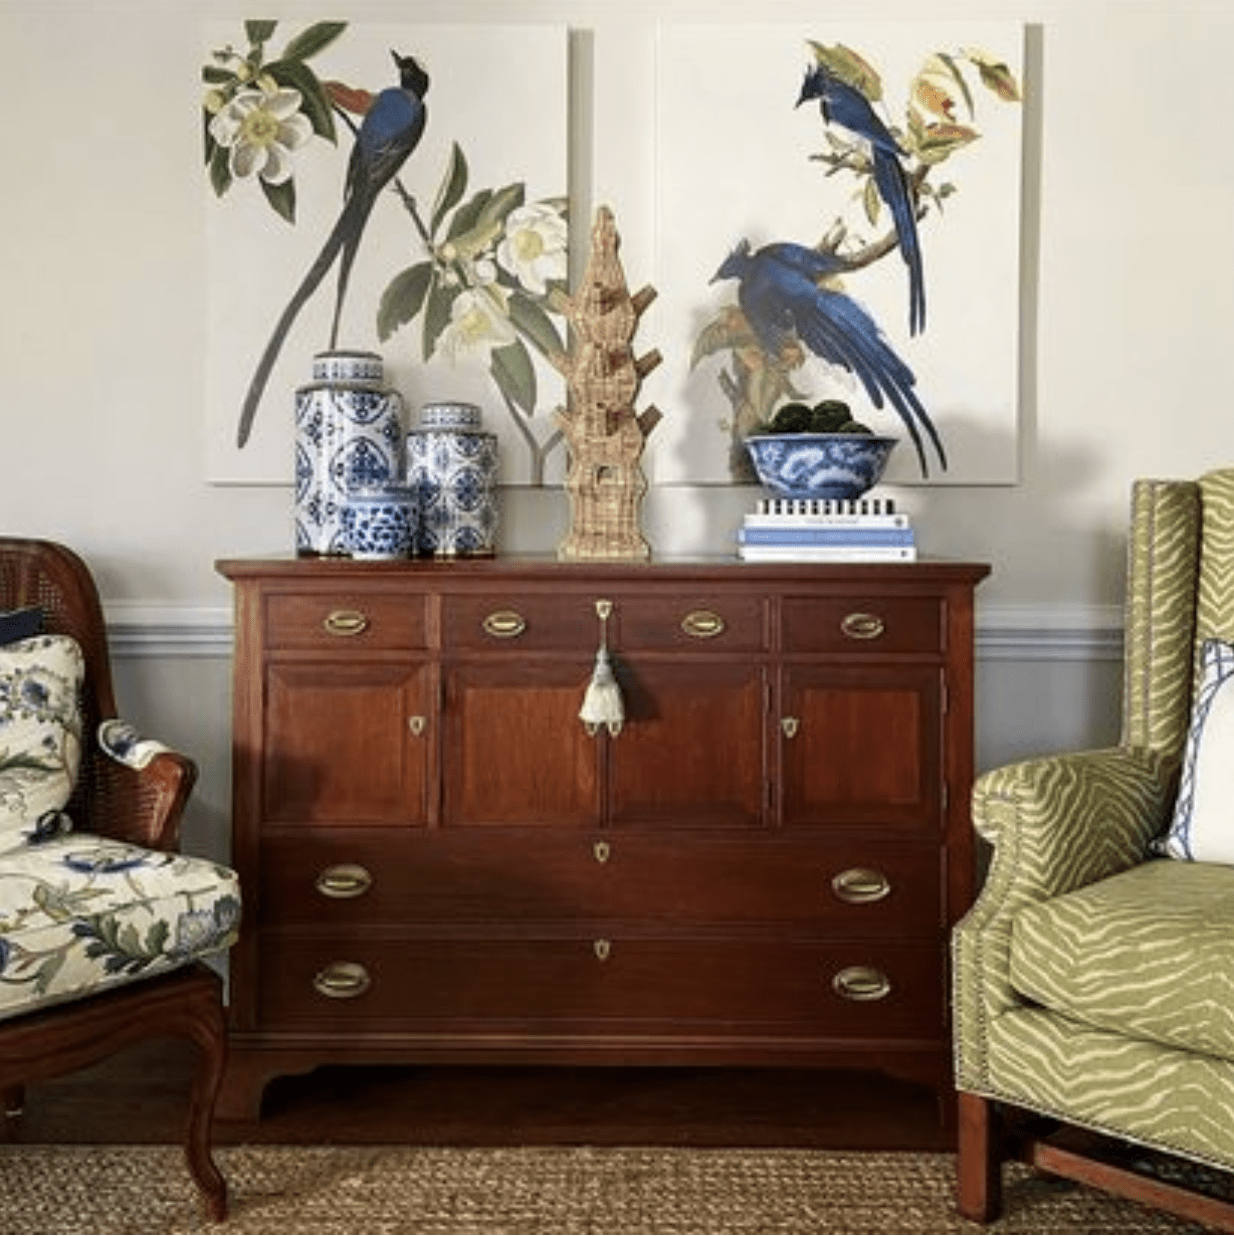 antique chest at southern charm home tour